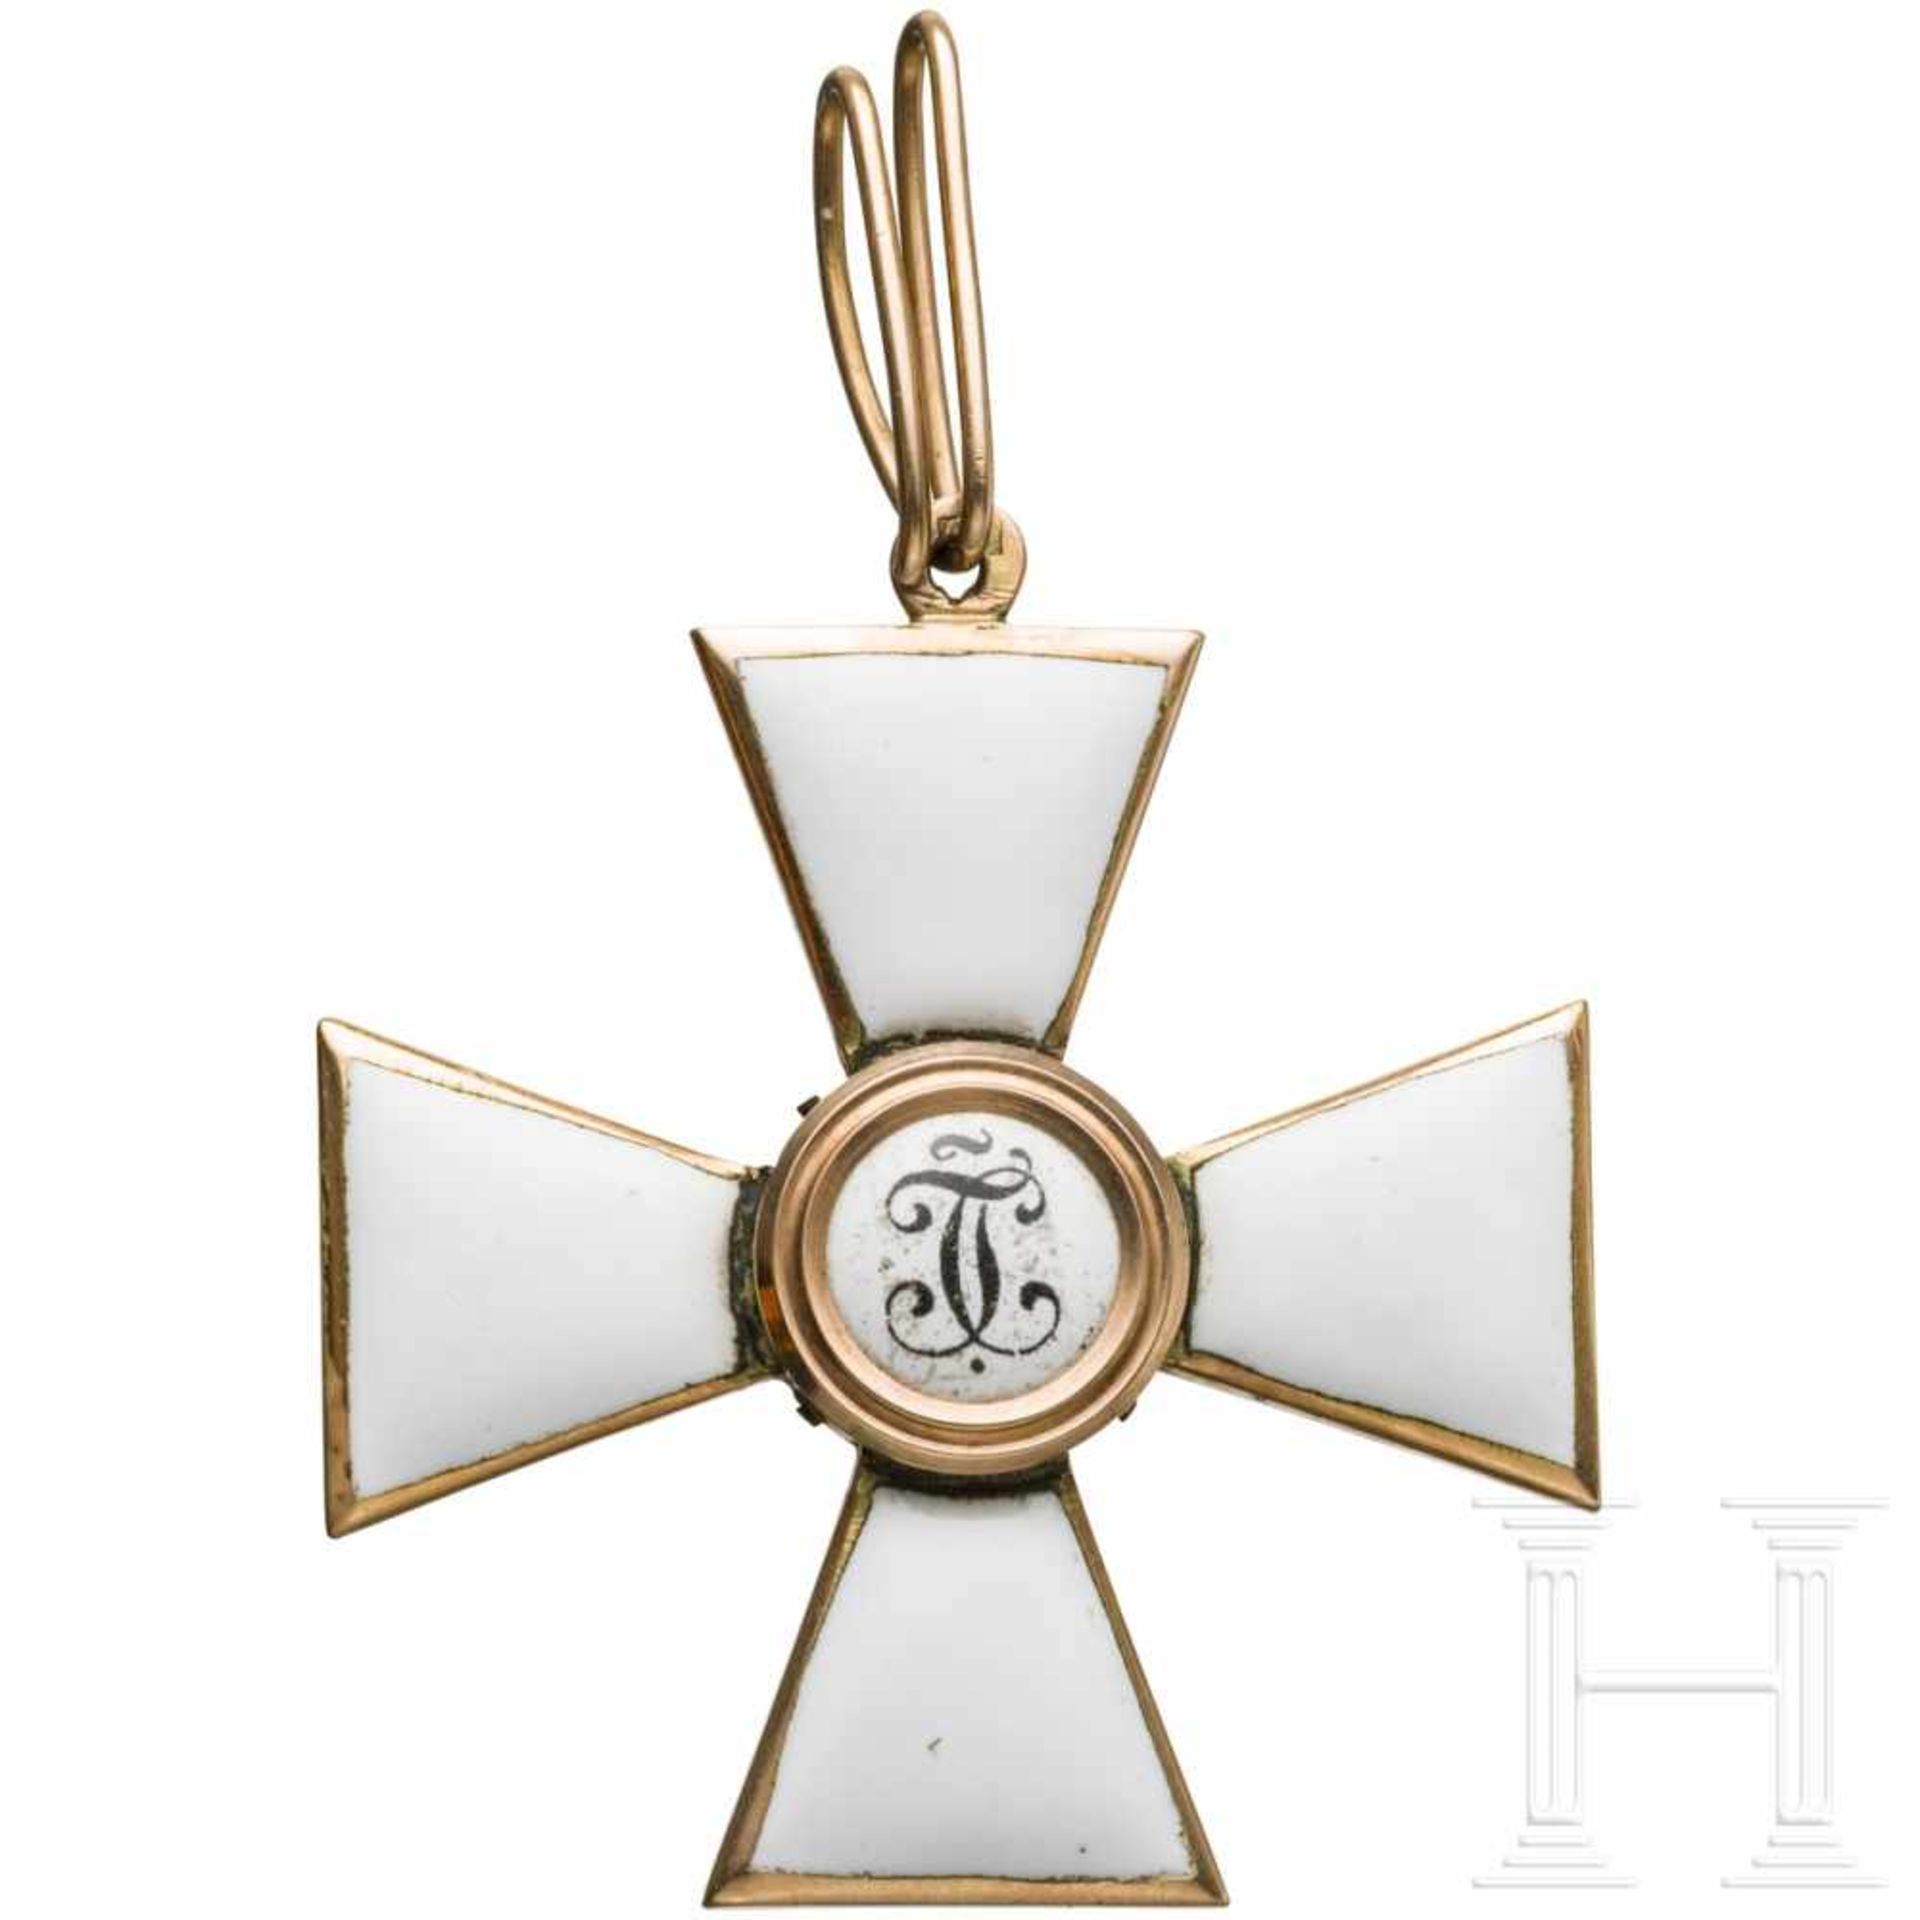 A Russian Order of St. George – a cross 4th class, circa 1915Gold, enamelled. The mark of fineness - Bild 3 aus 5